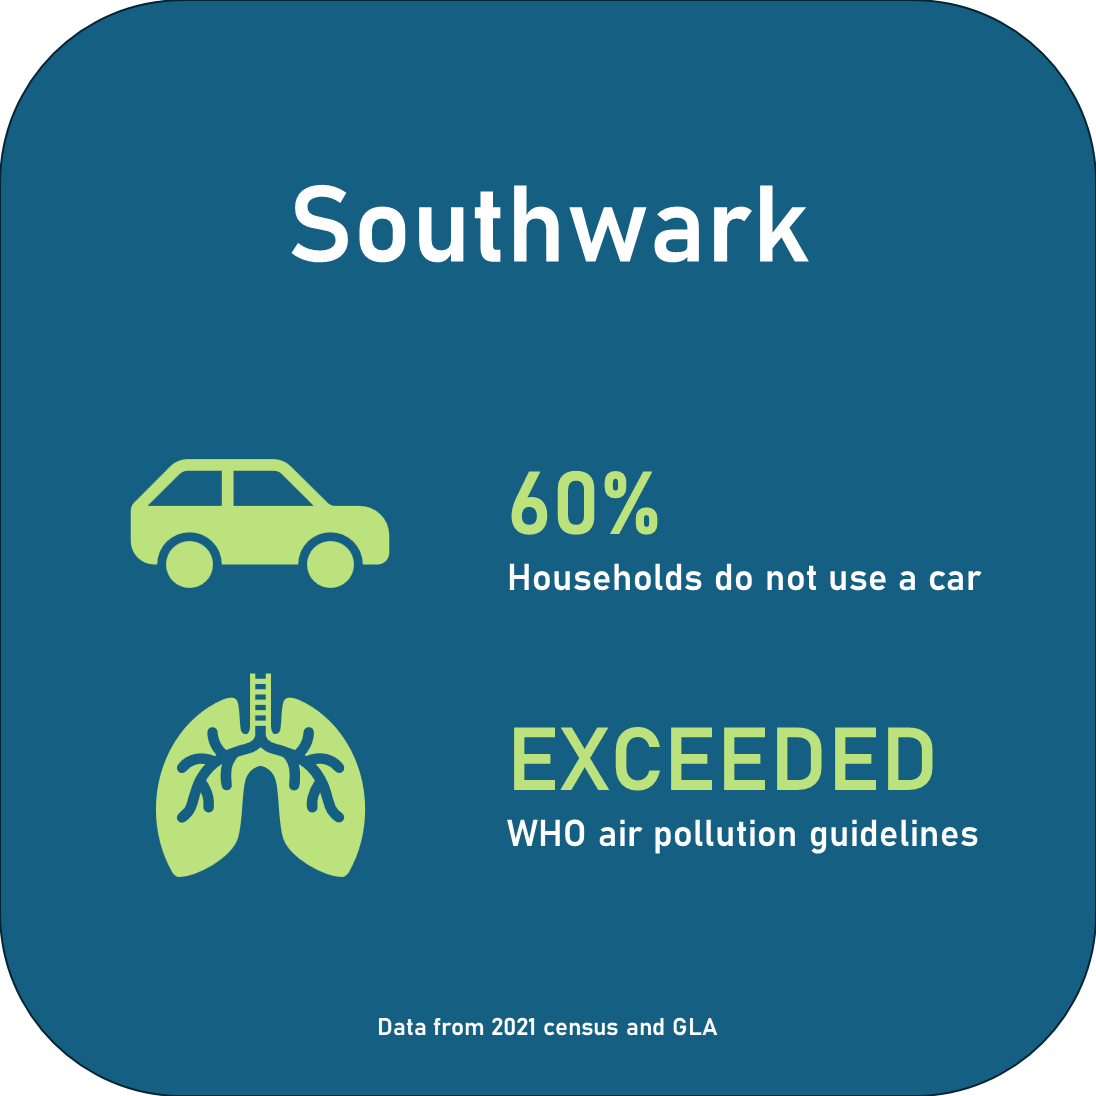 60% households do not use a car. Exceeded WHO air pollution guidelines.